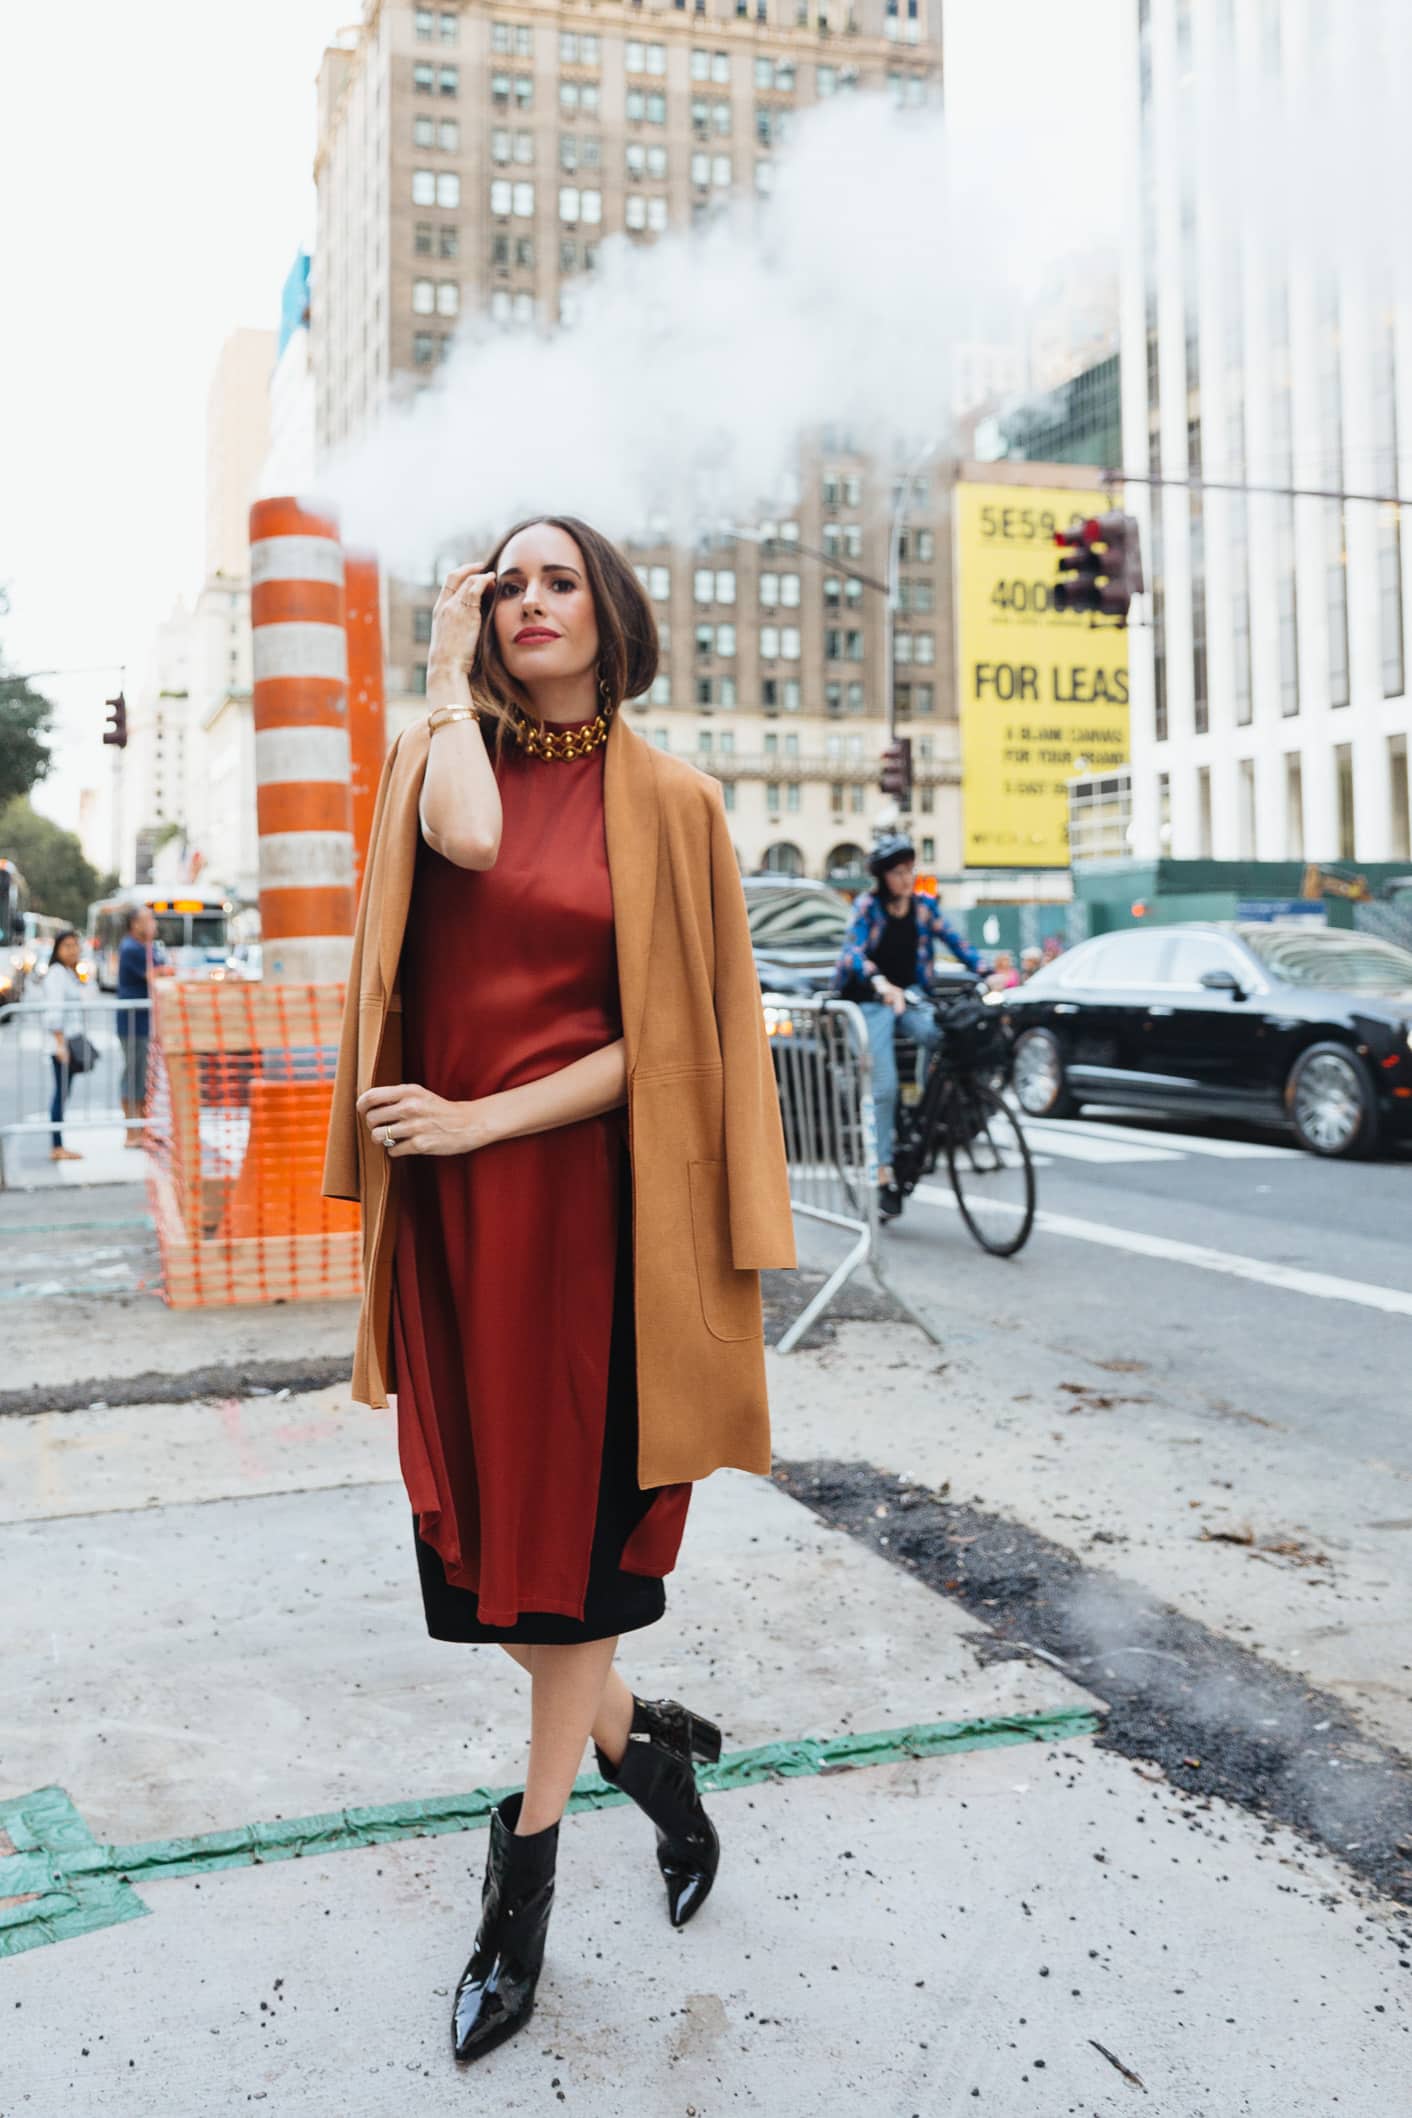 Louise Roe wearing copper tunic at NYFW